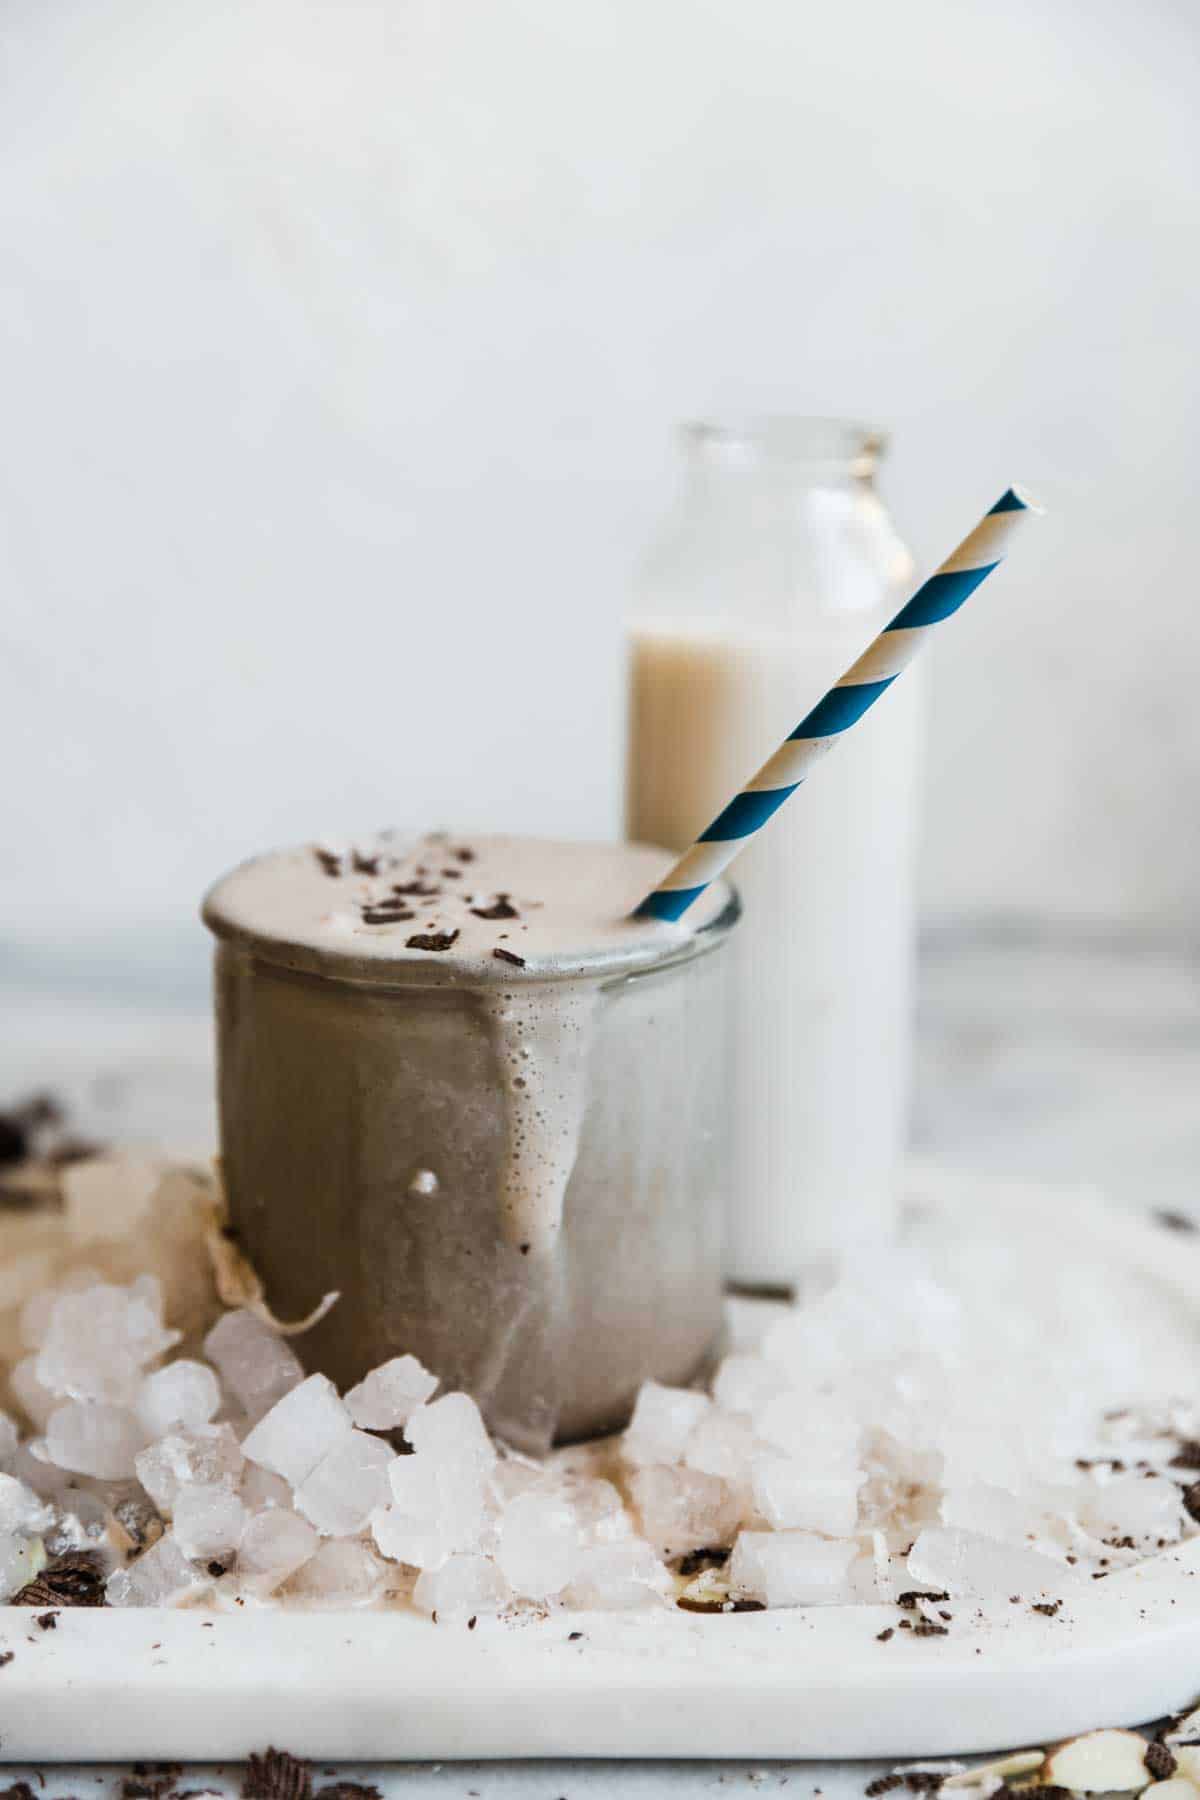 A single glass of chocolate protein smoothie with a straw. There is a bottle of milk in the background.